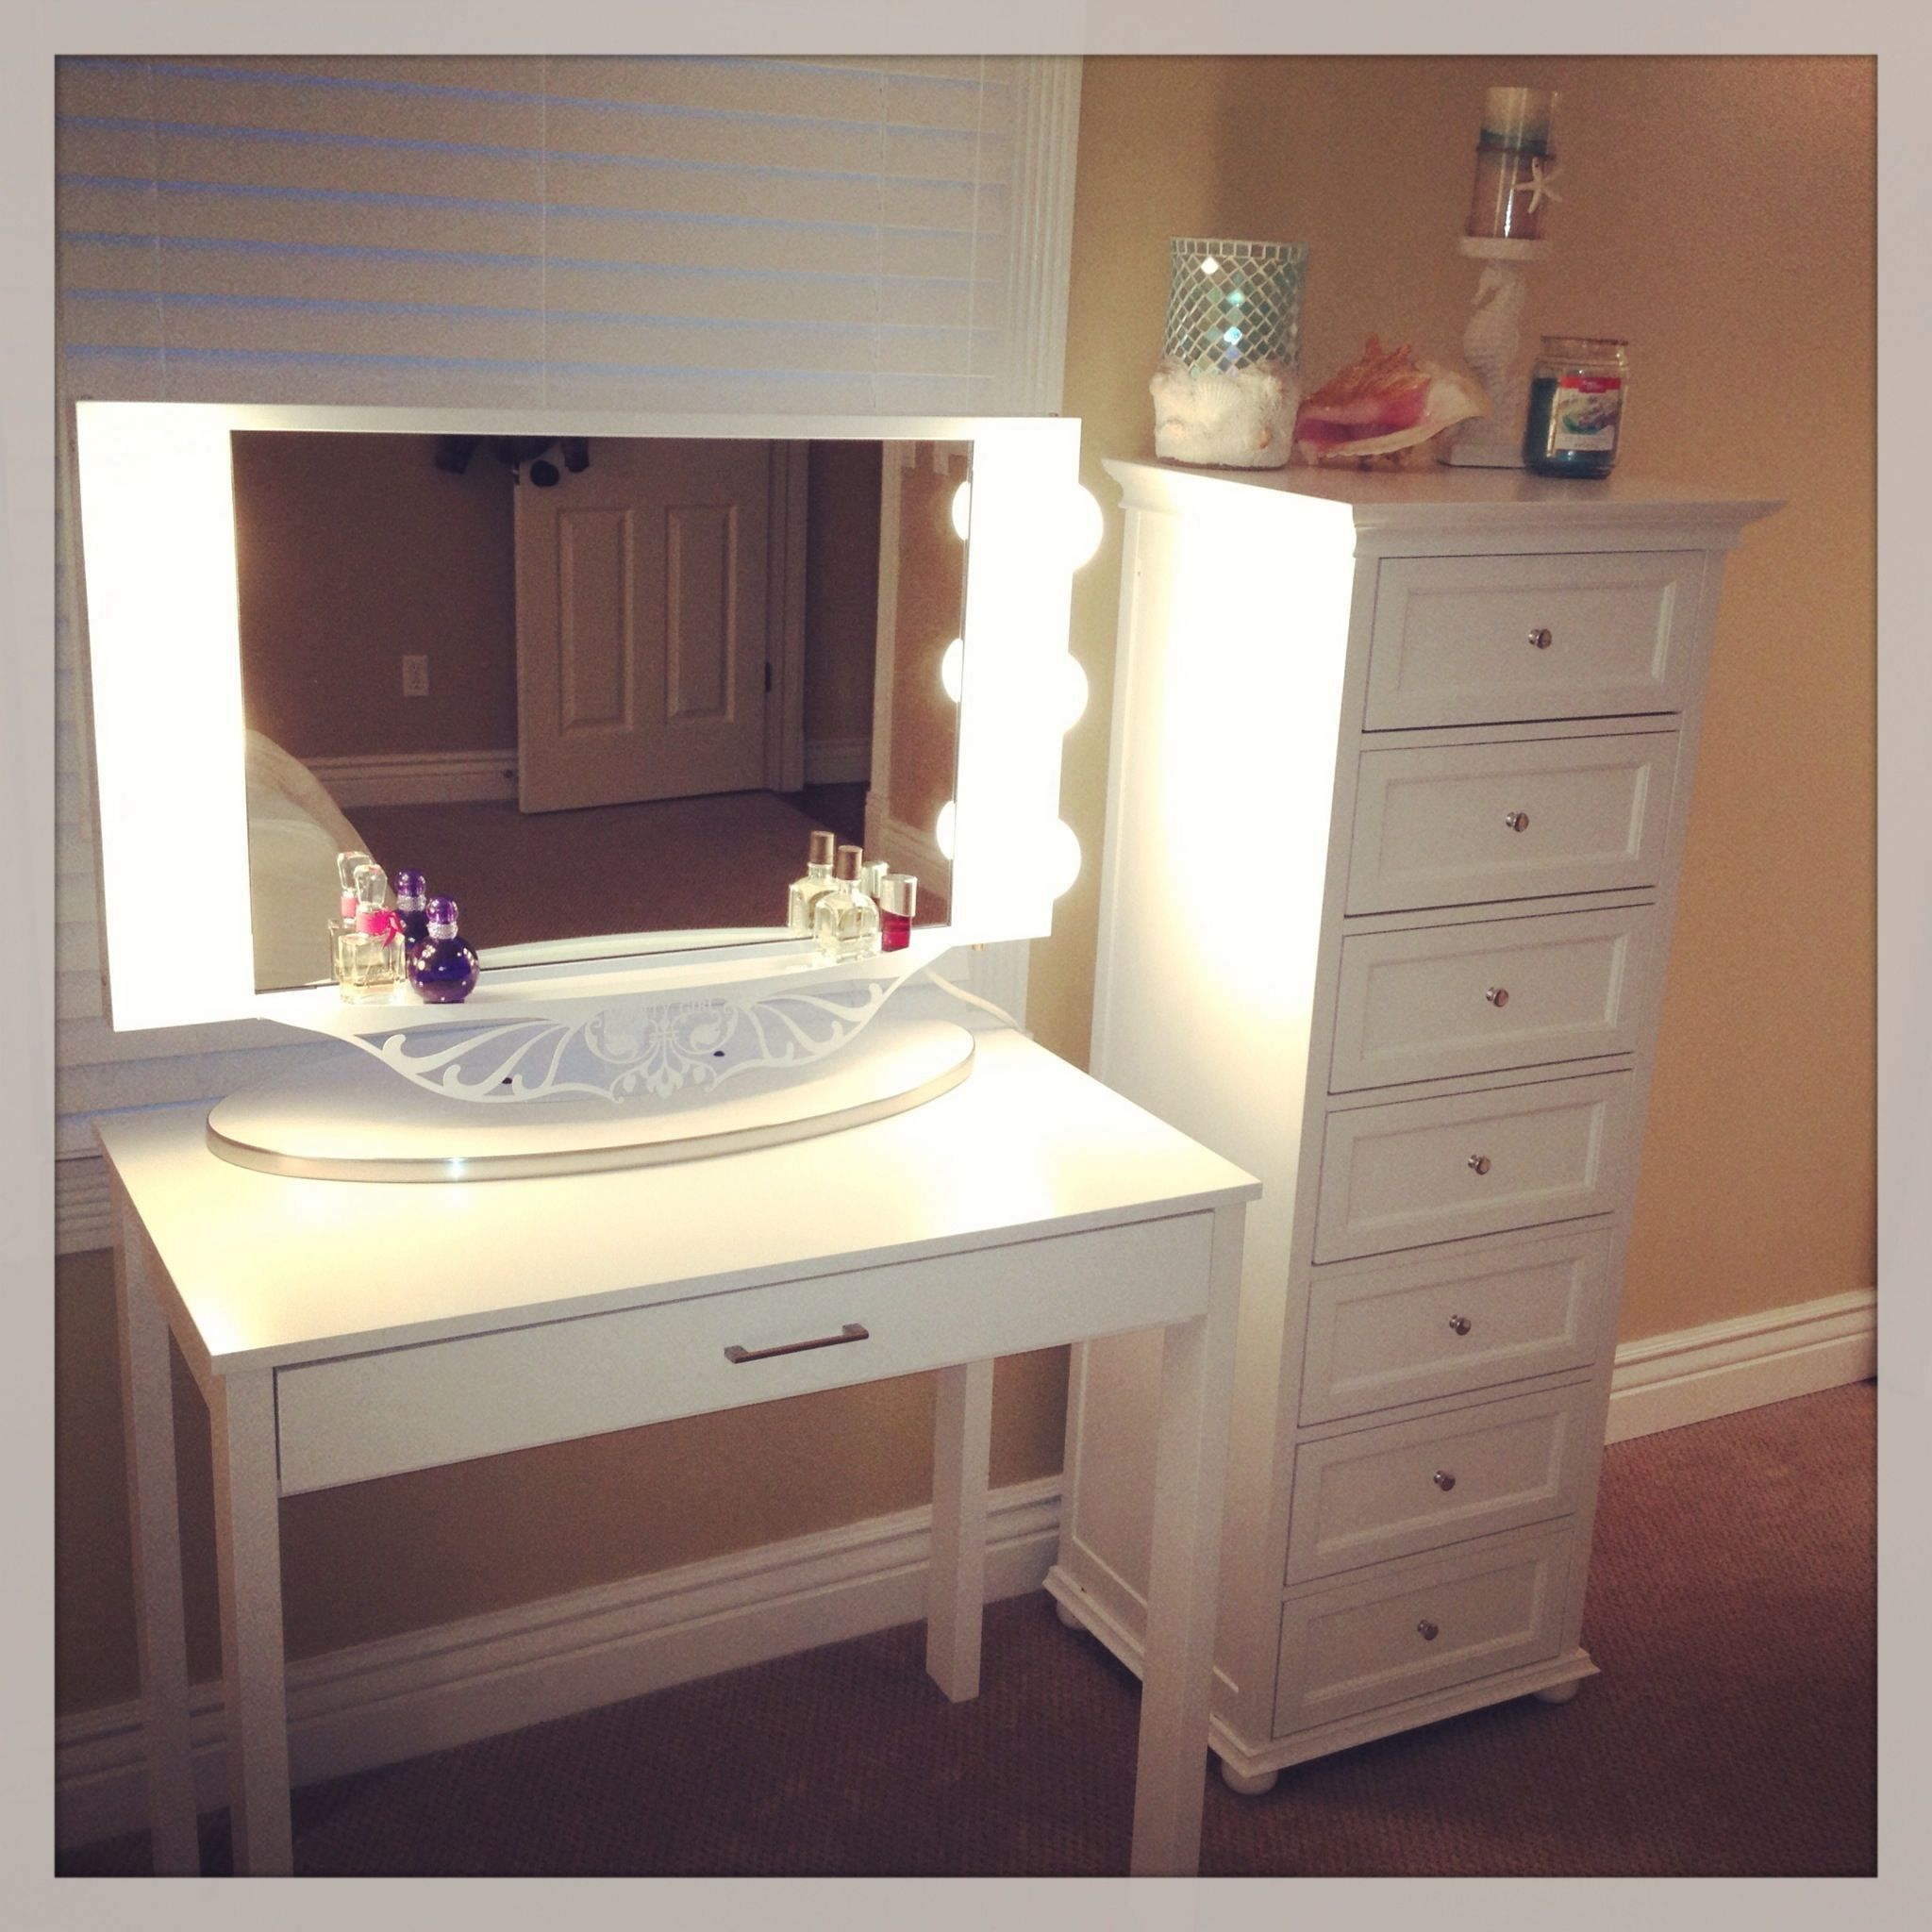 15 Inspirations Free Standing Mirror for Dressing Table | Mirror Ideas
